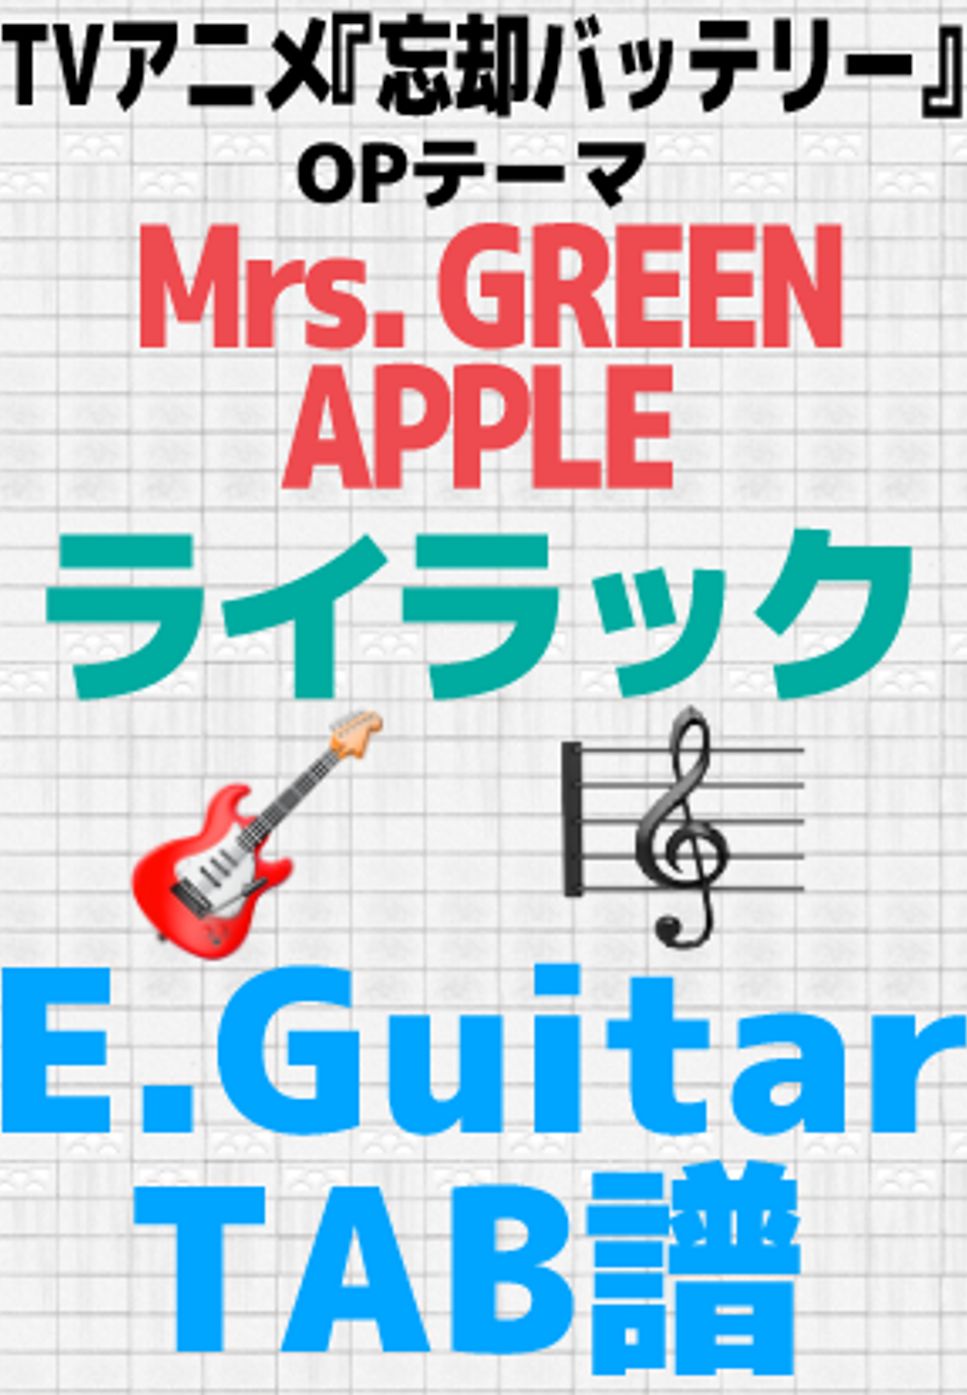 Mrs. GREEN APPLE - 【🎸TABS】ライラック(TV Size) - Mrs. GREEN APPLE  Guitar Cover【忘却バッテリーOP】 by GakuChannel